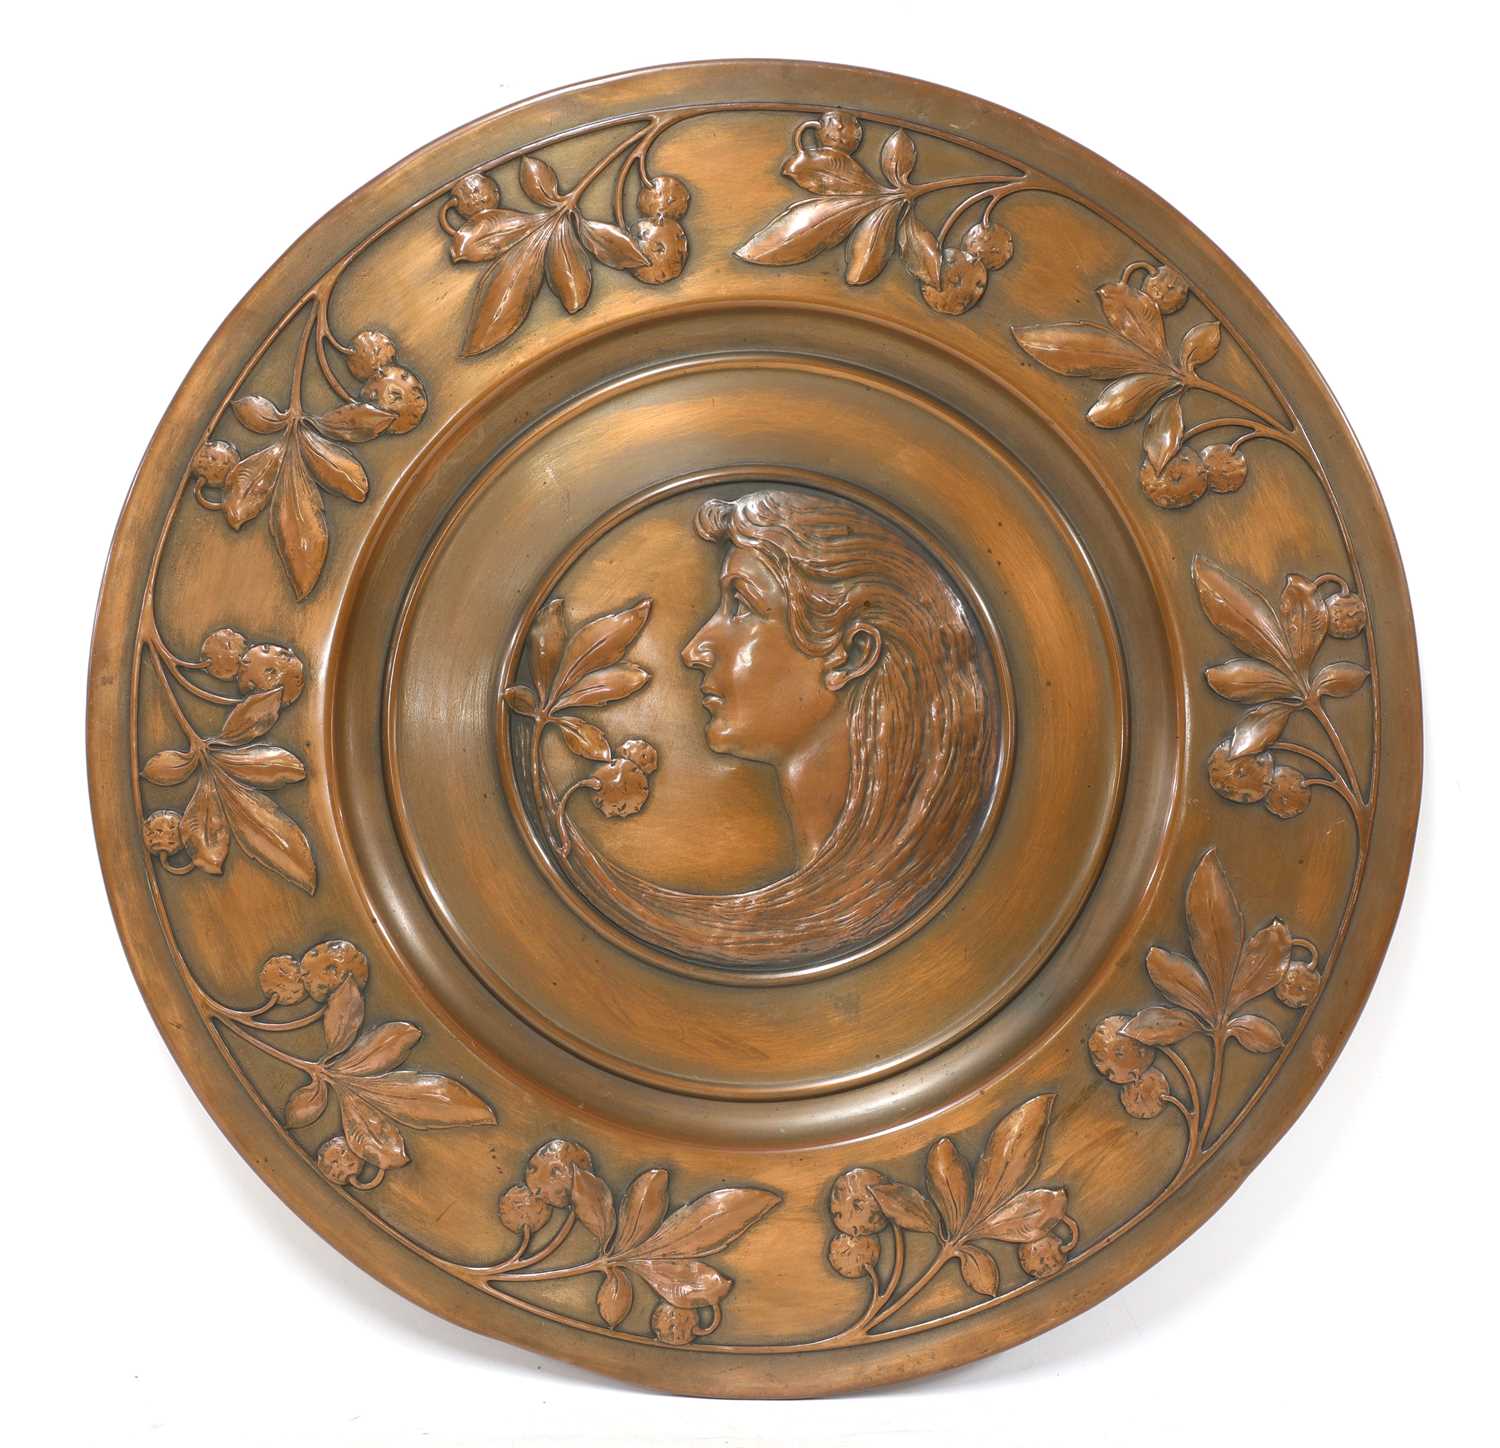 Lot 72 - A WMF embossed copper plaque